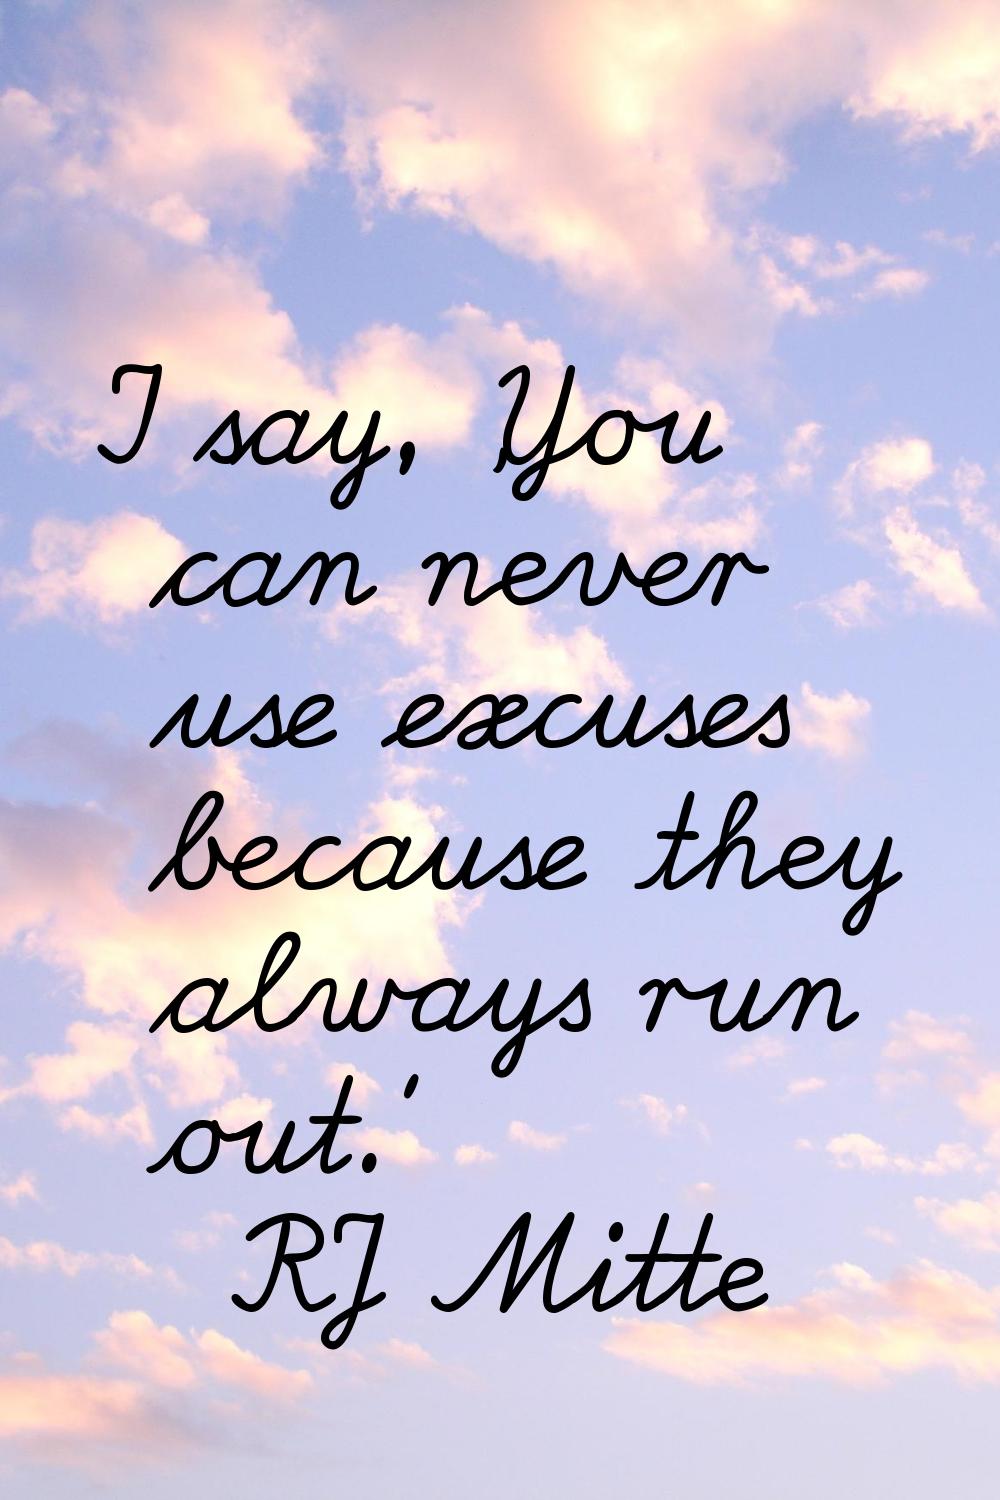 I say, 'You can never use excuses because they always run out.'